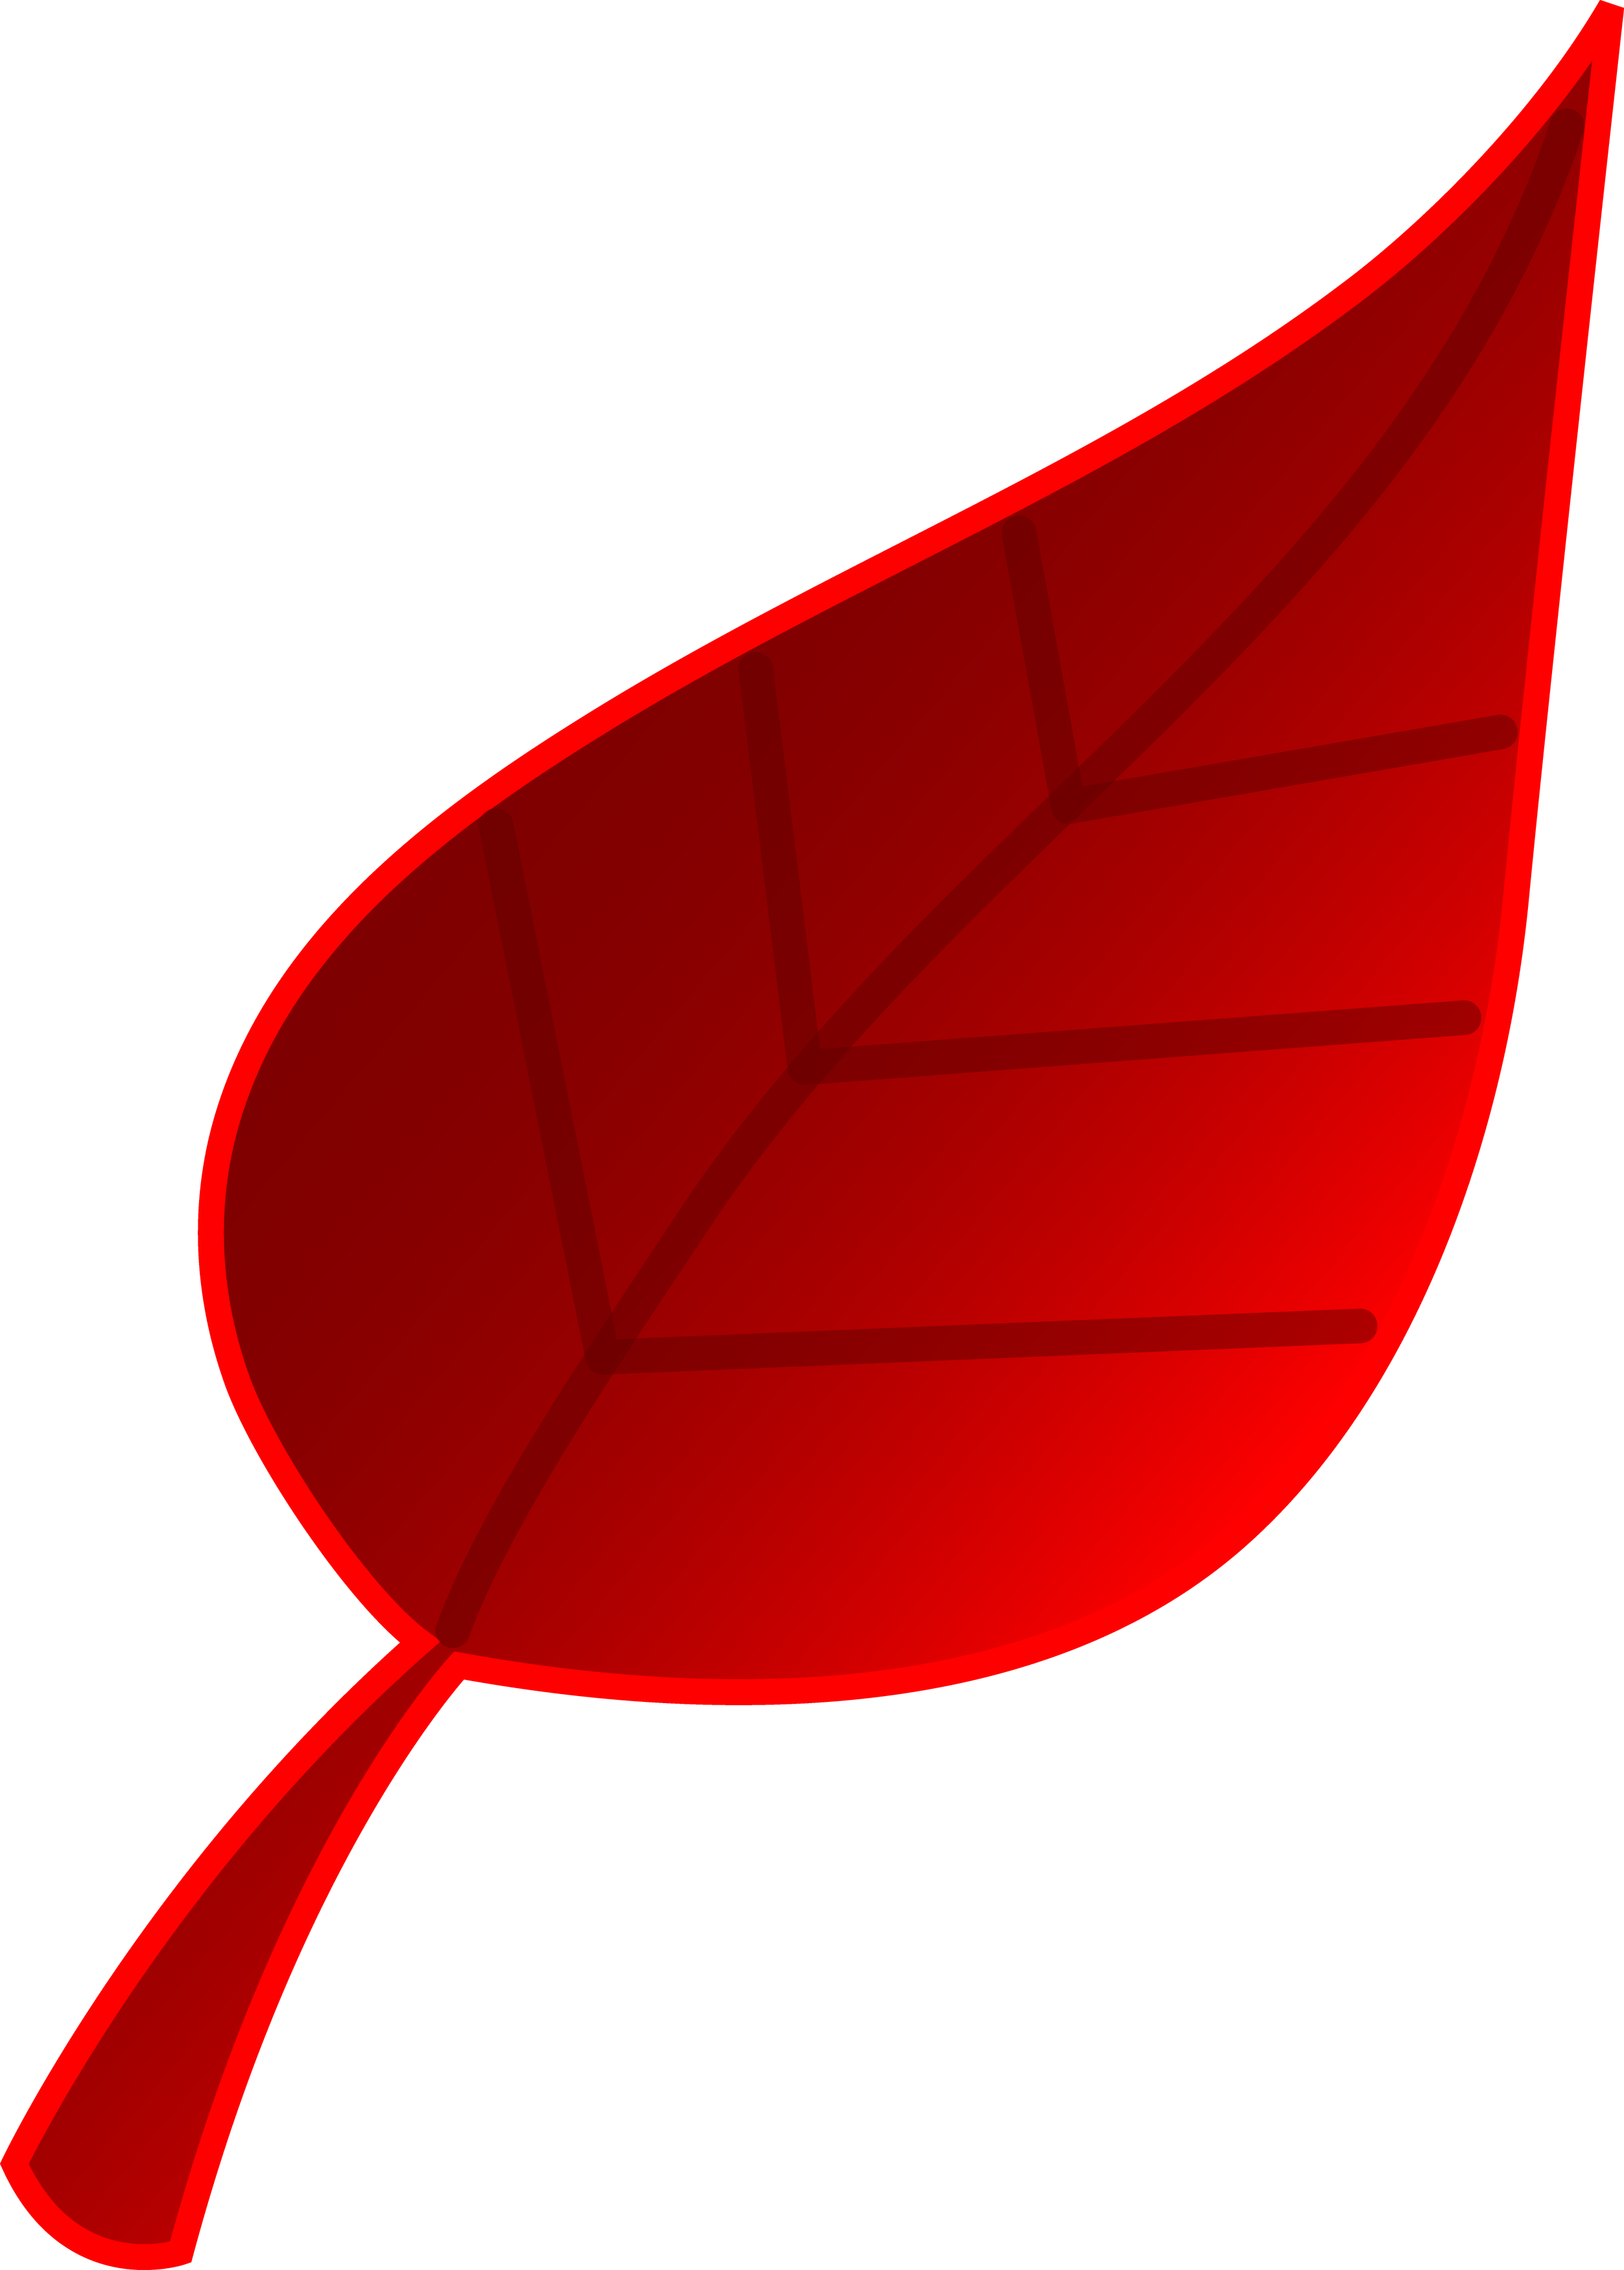 moving clipart leaf